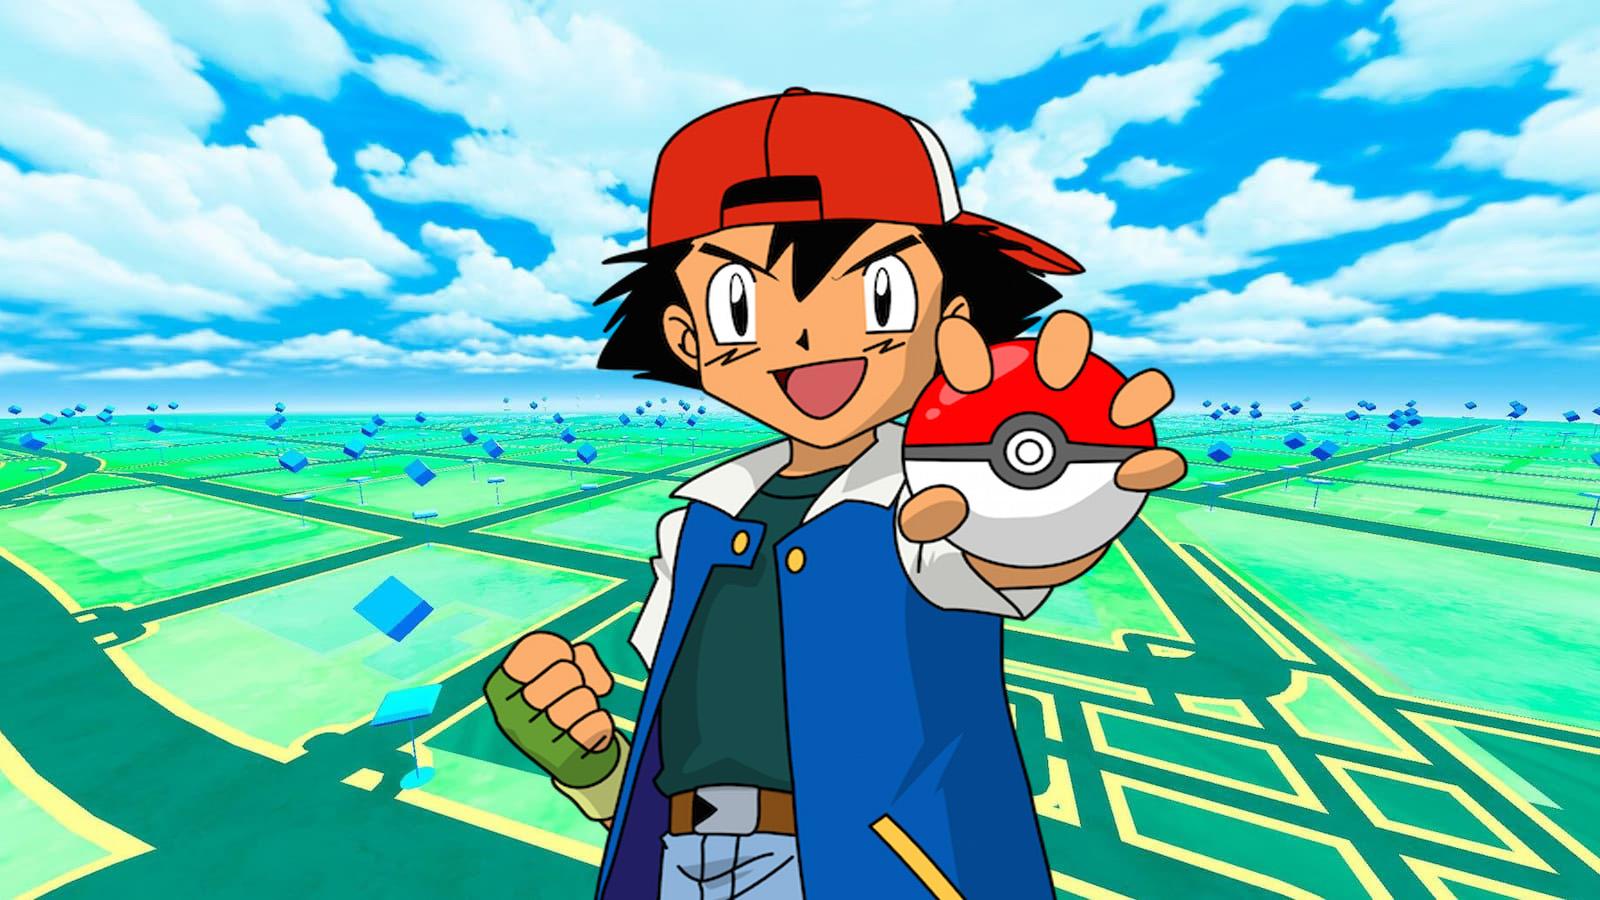 Ash holding a Poke Ball in front of Pokemon Go overworld map